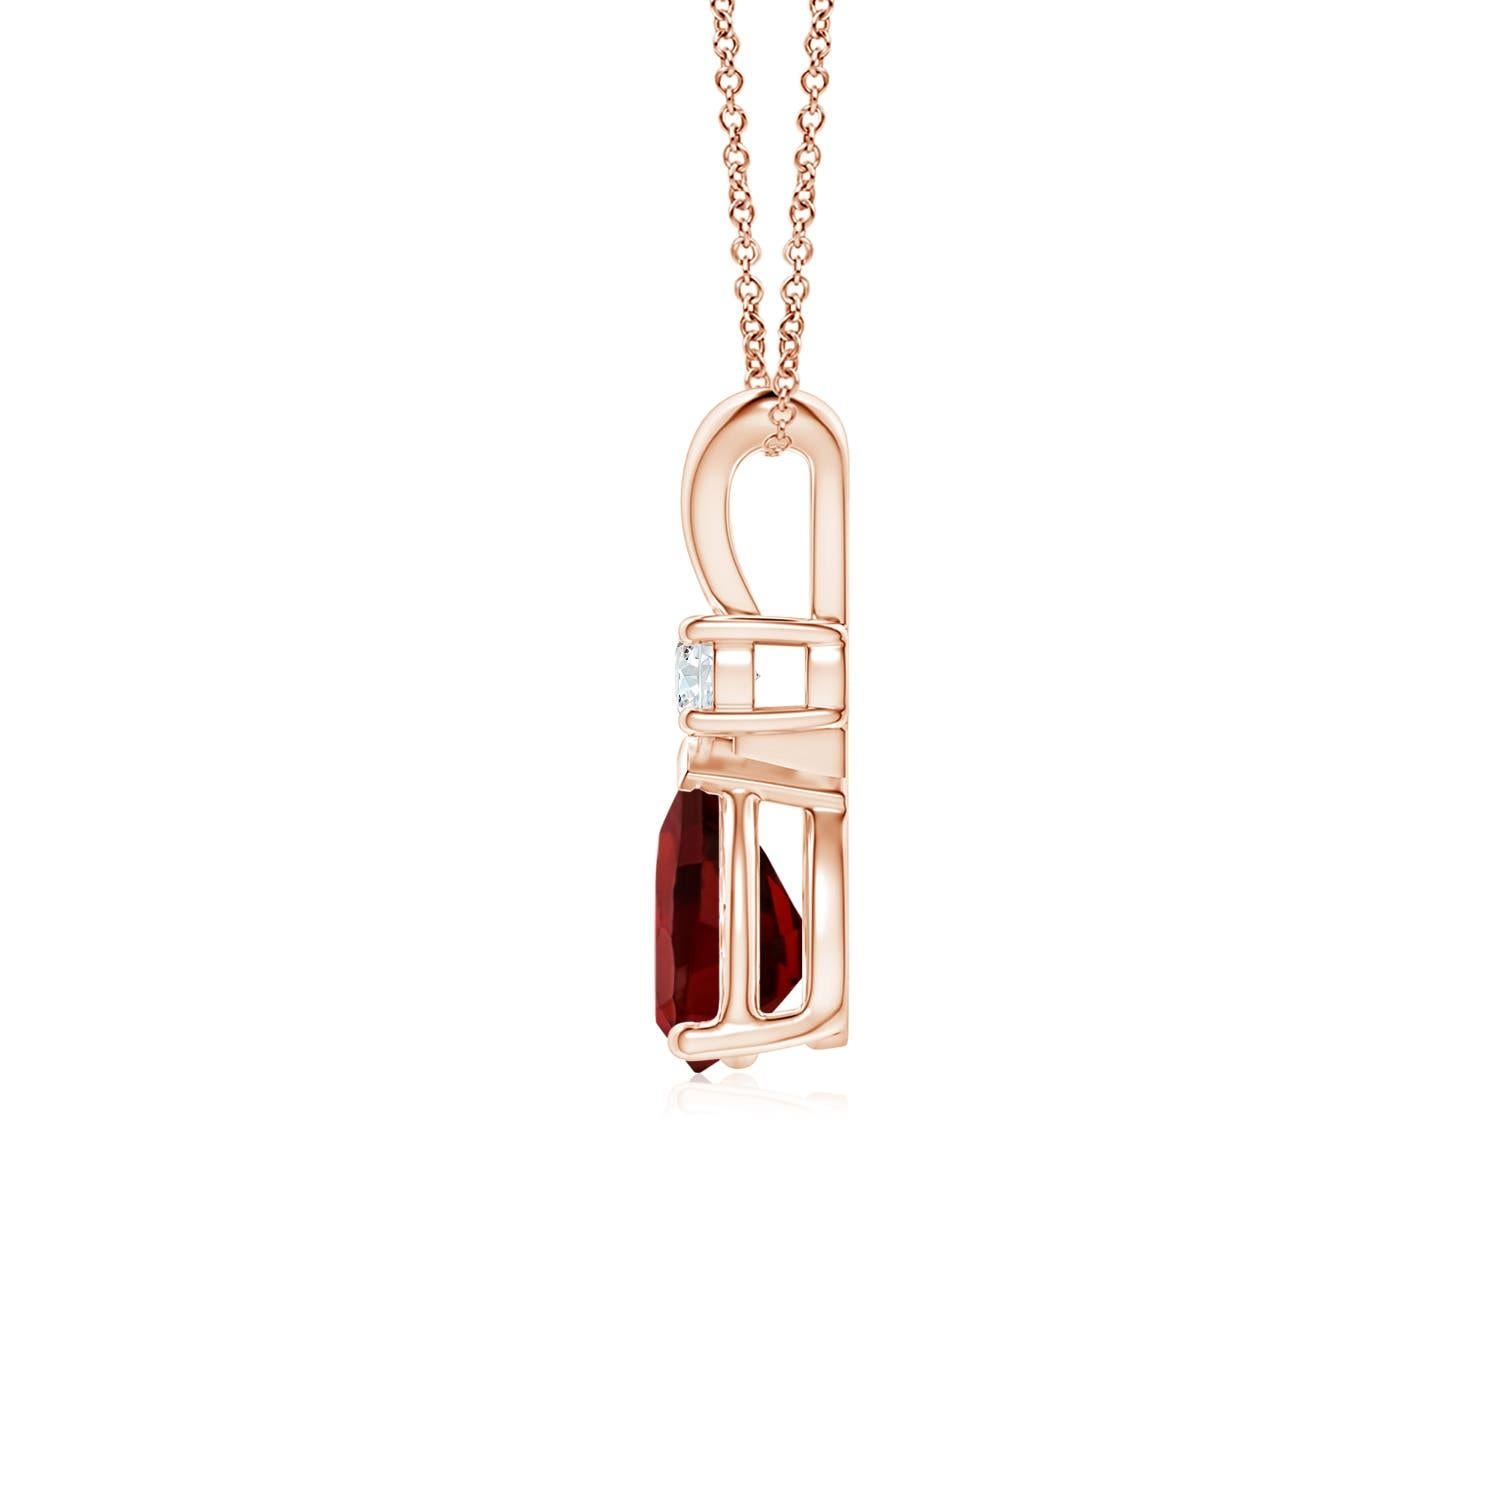 A pear-shaped intense red garnet is secured in a prong setting and embellished with a diamond accent on the top. Simple yet stunning, this teardrop garnet pendant with V bale is sculpted in 14k rose gold.
Garnet is the Birthstone for January and